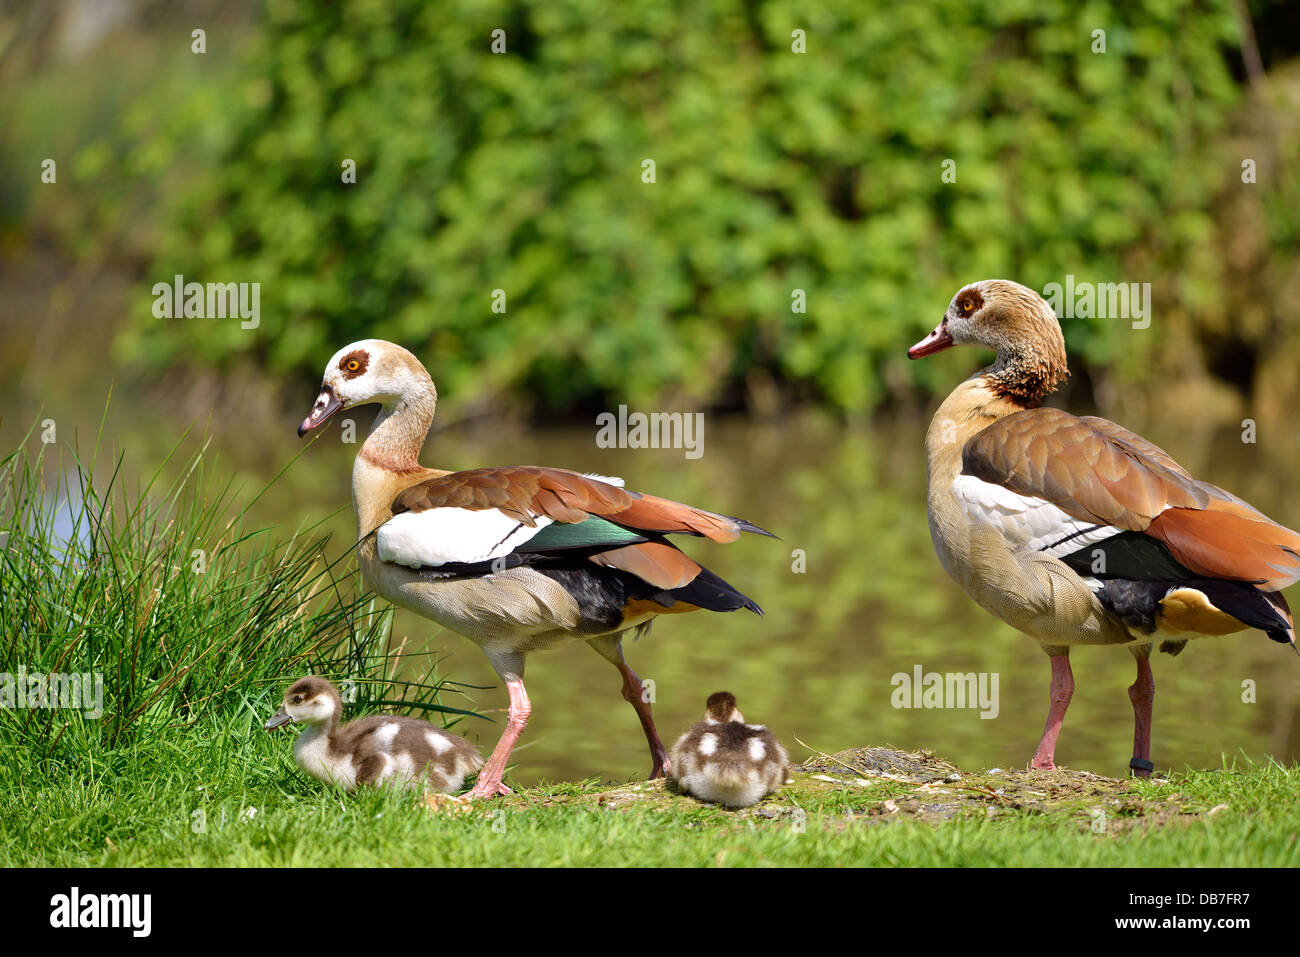 Couple of Egyptian Geese (Alopochen aegyptiacus) on grass with two chicks Stock Photo